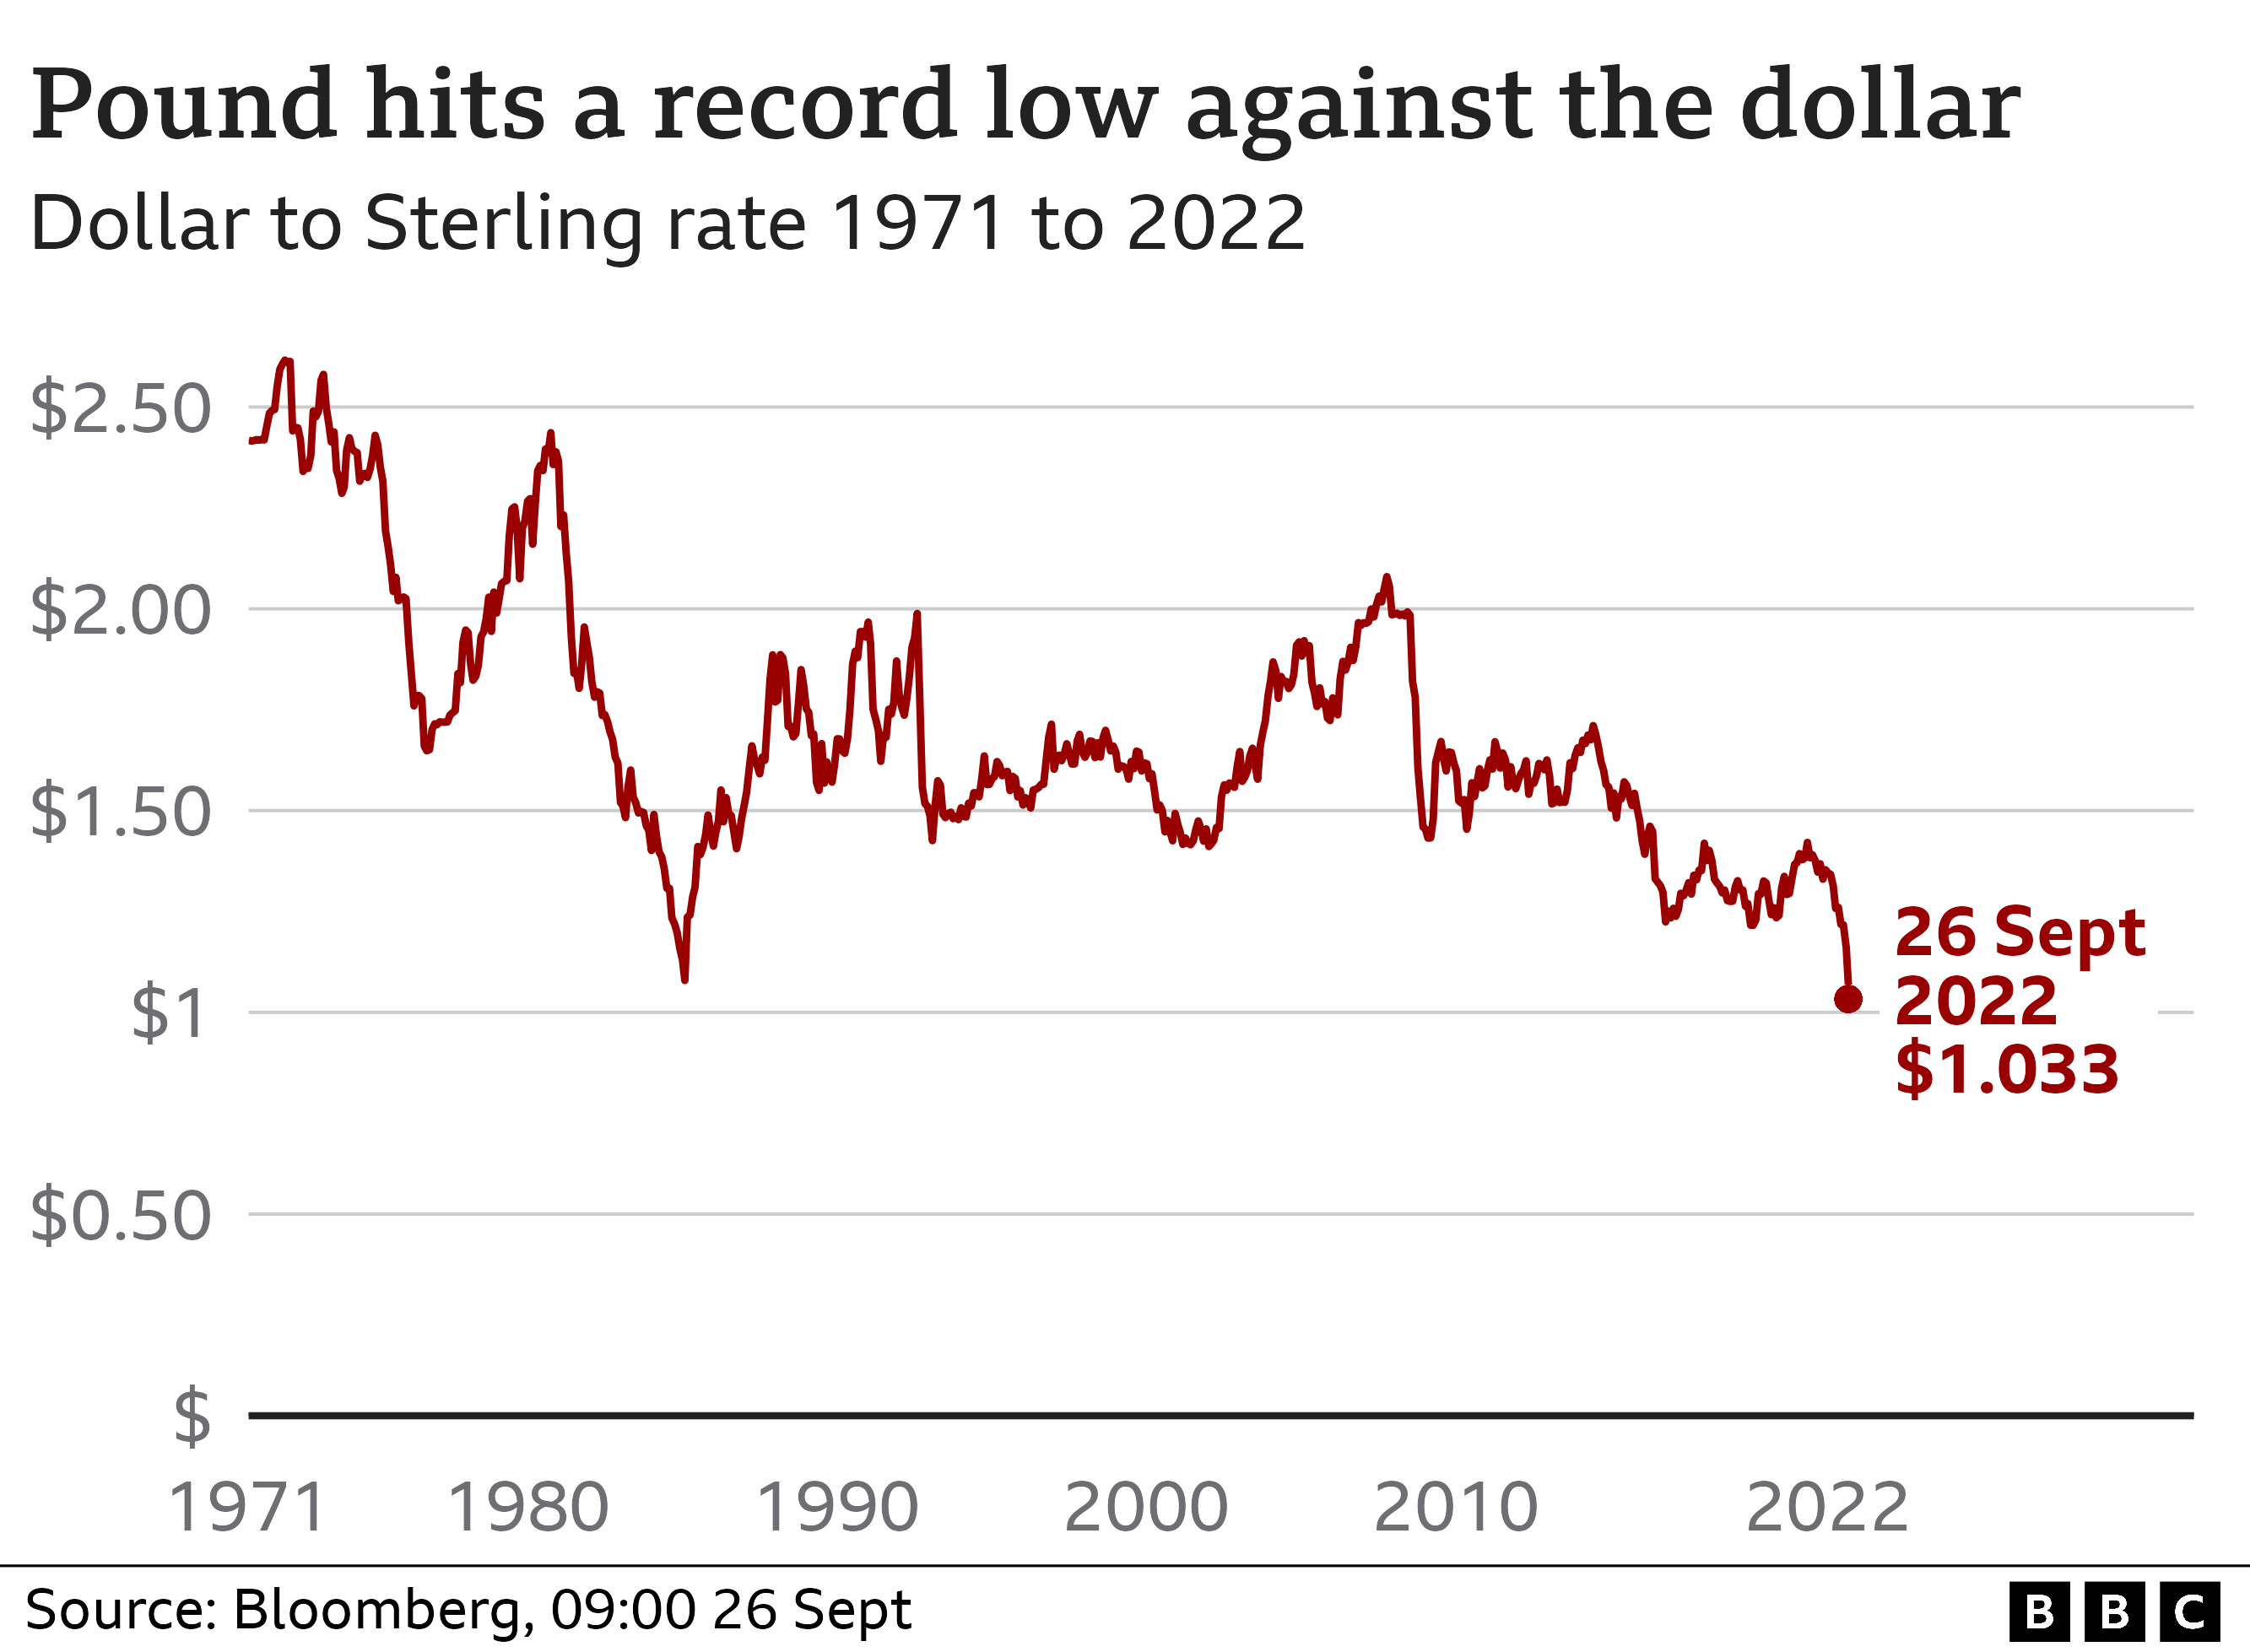 Graph showing dollar to sterling rate 1971 to 2022.